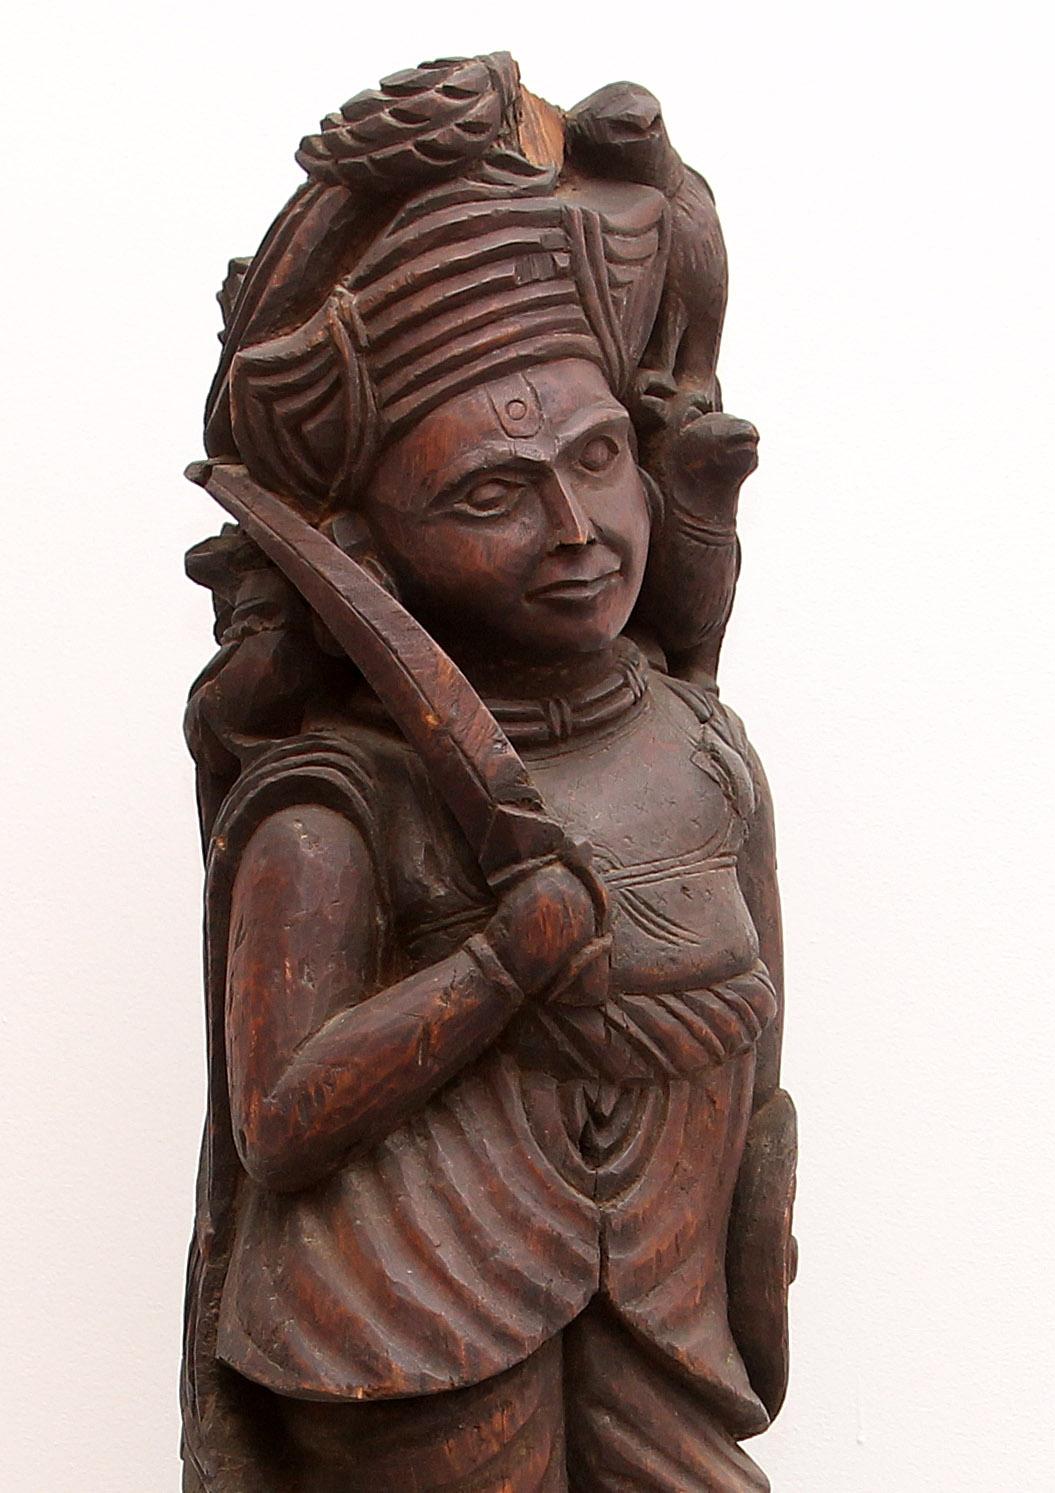 Antique Indonesian Sculpture - Brown Figurative Sculpture by Unknown